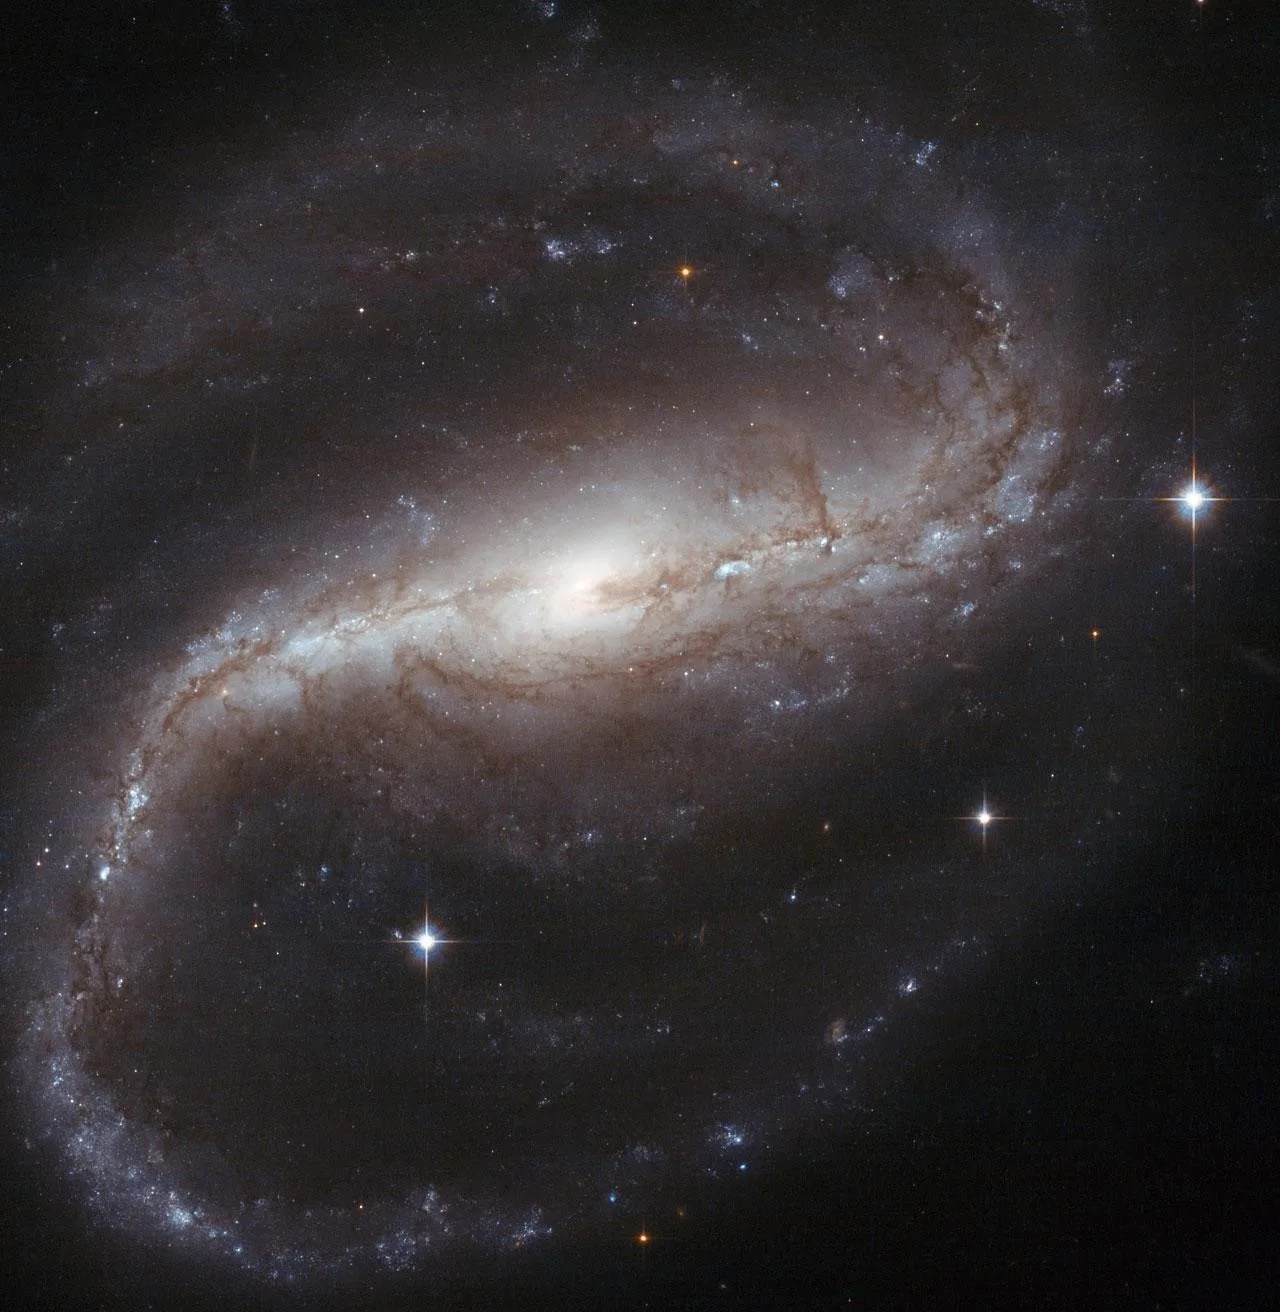 A "barred spiral" galaxy is shaped like a backward S, with its arms of gas and dust made up of whites, pinks, red-browns, and pale blues. The center of the galaxy (the middle of the S) is a glowing white sphere.